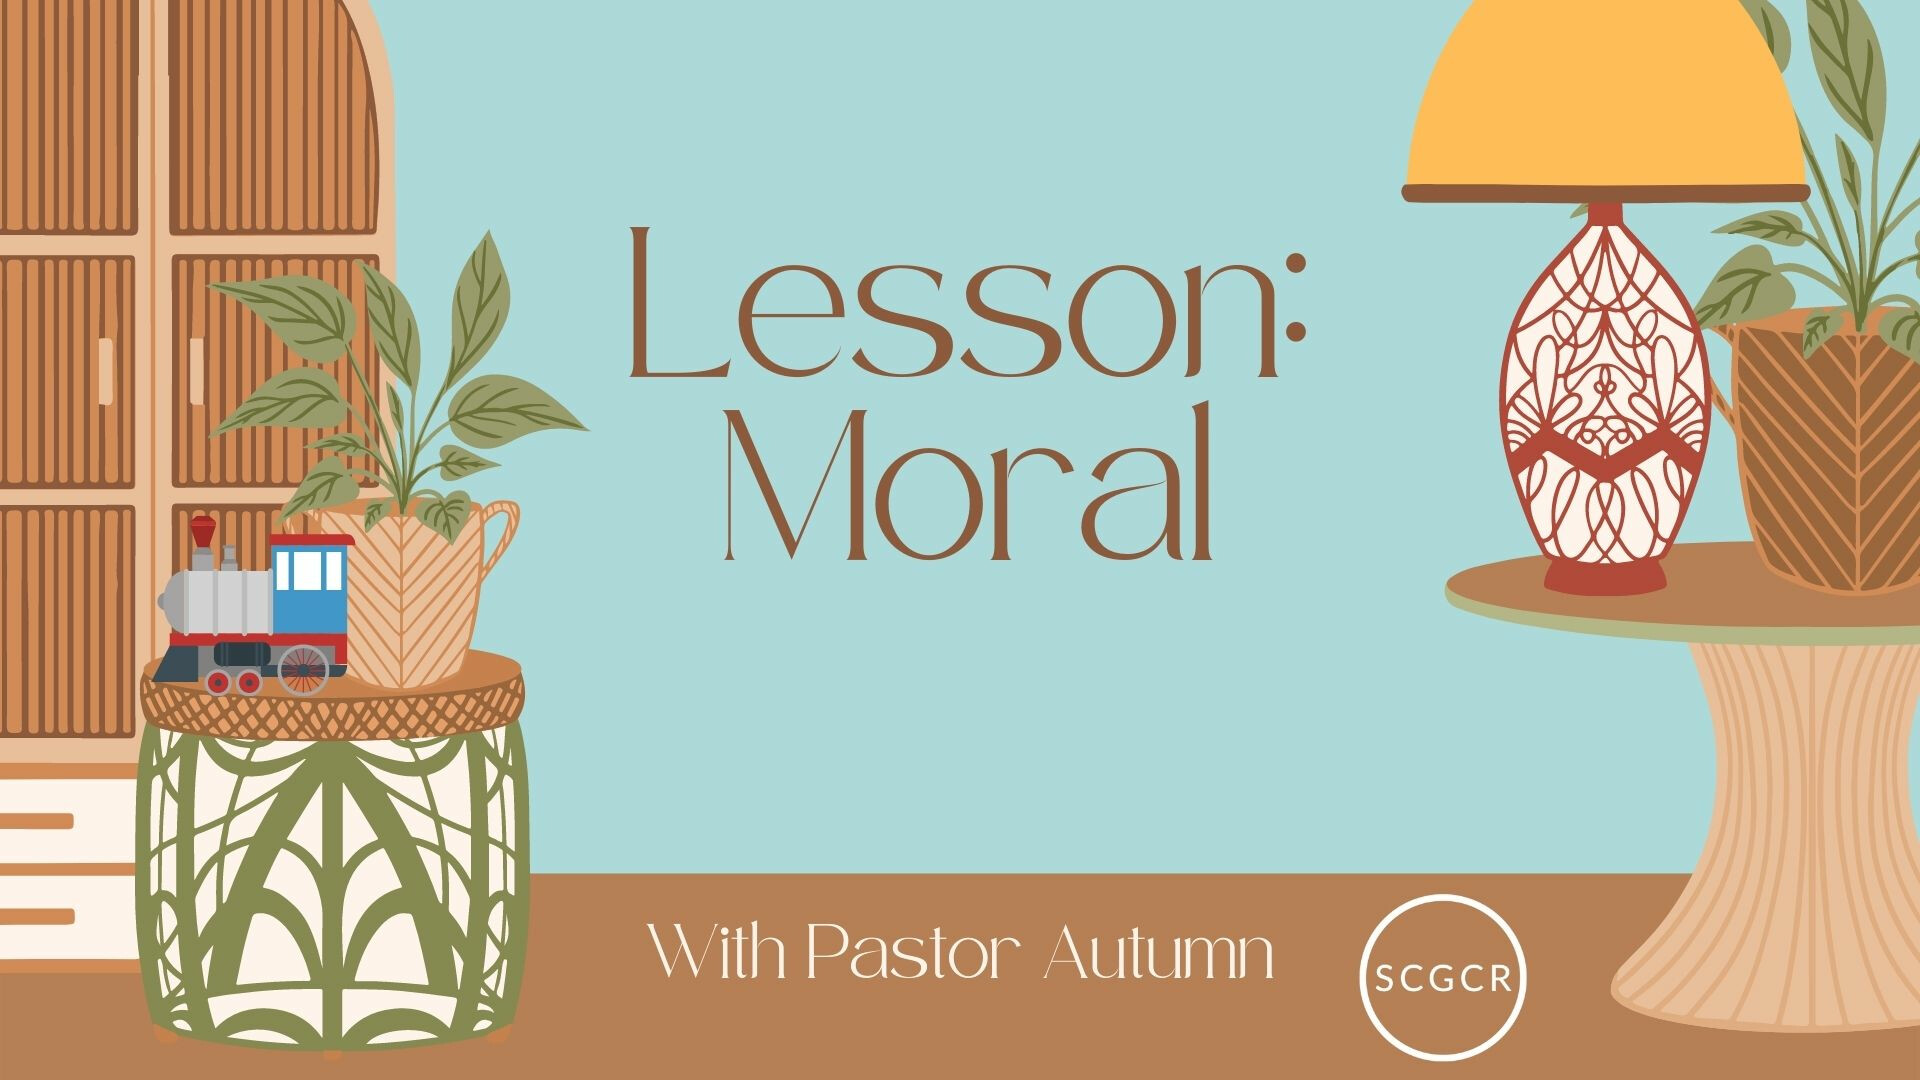 Lesson 8: Moral with Pastor Autumn & Community Dinner Pizza Party